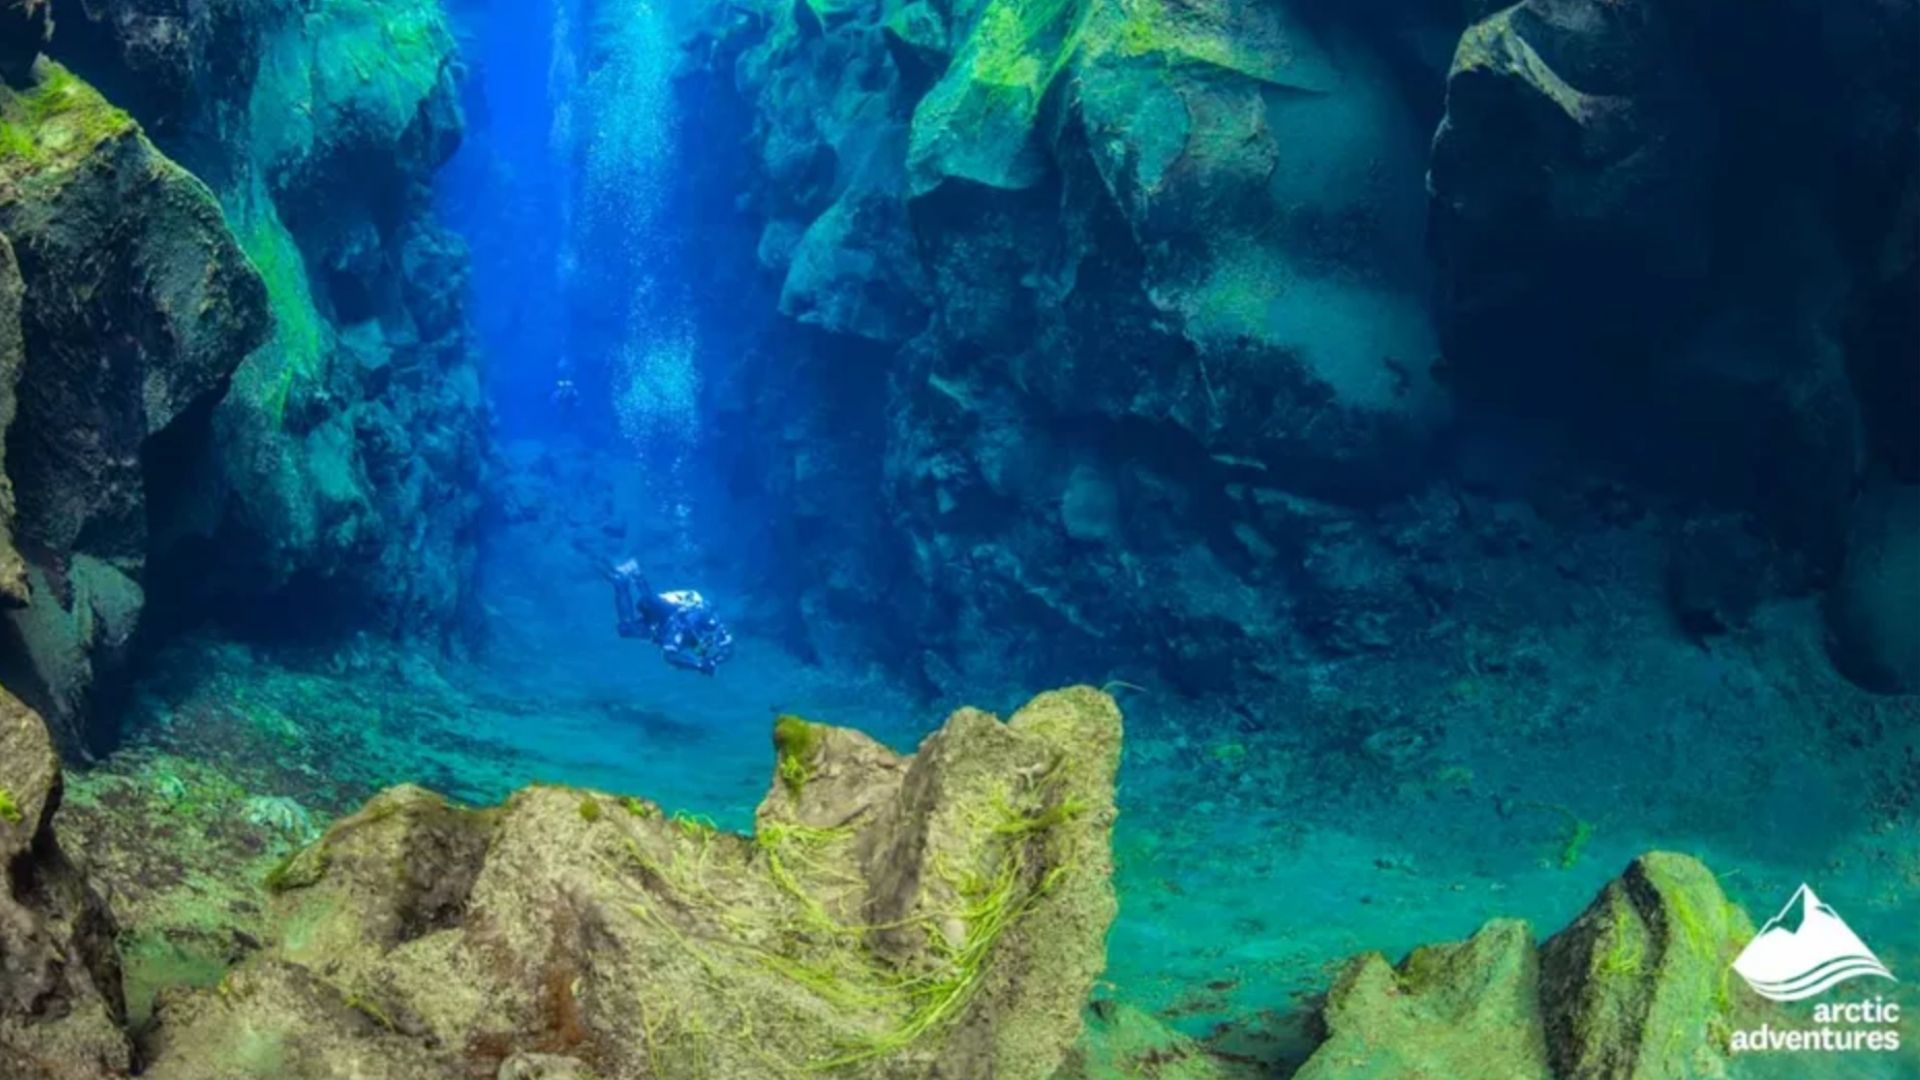 Diving in Silfra is a great activity to do in the Thingvellir National Park in the Golden Circle in Iceland